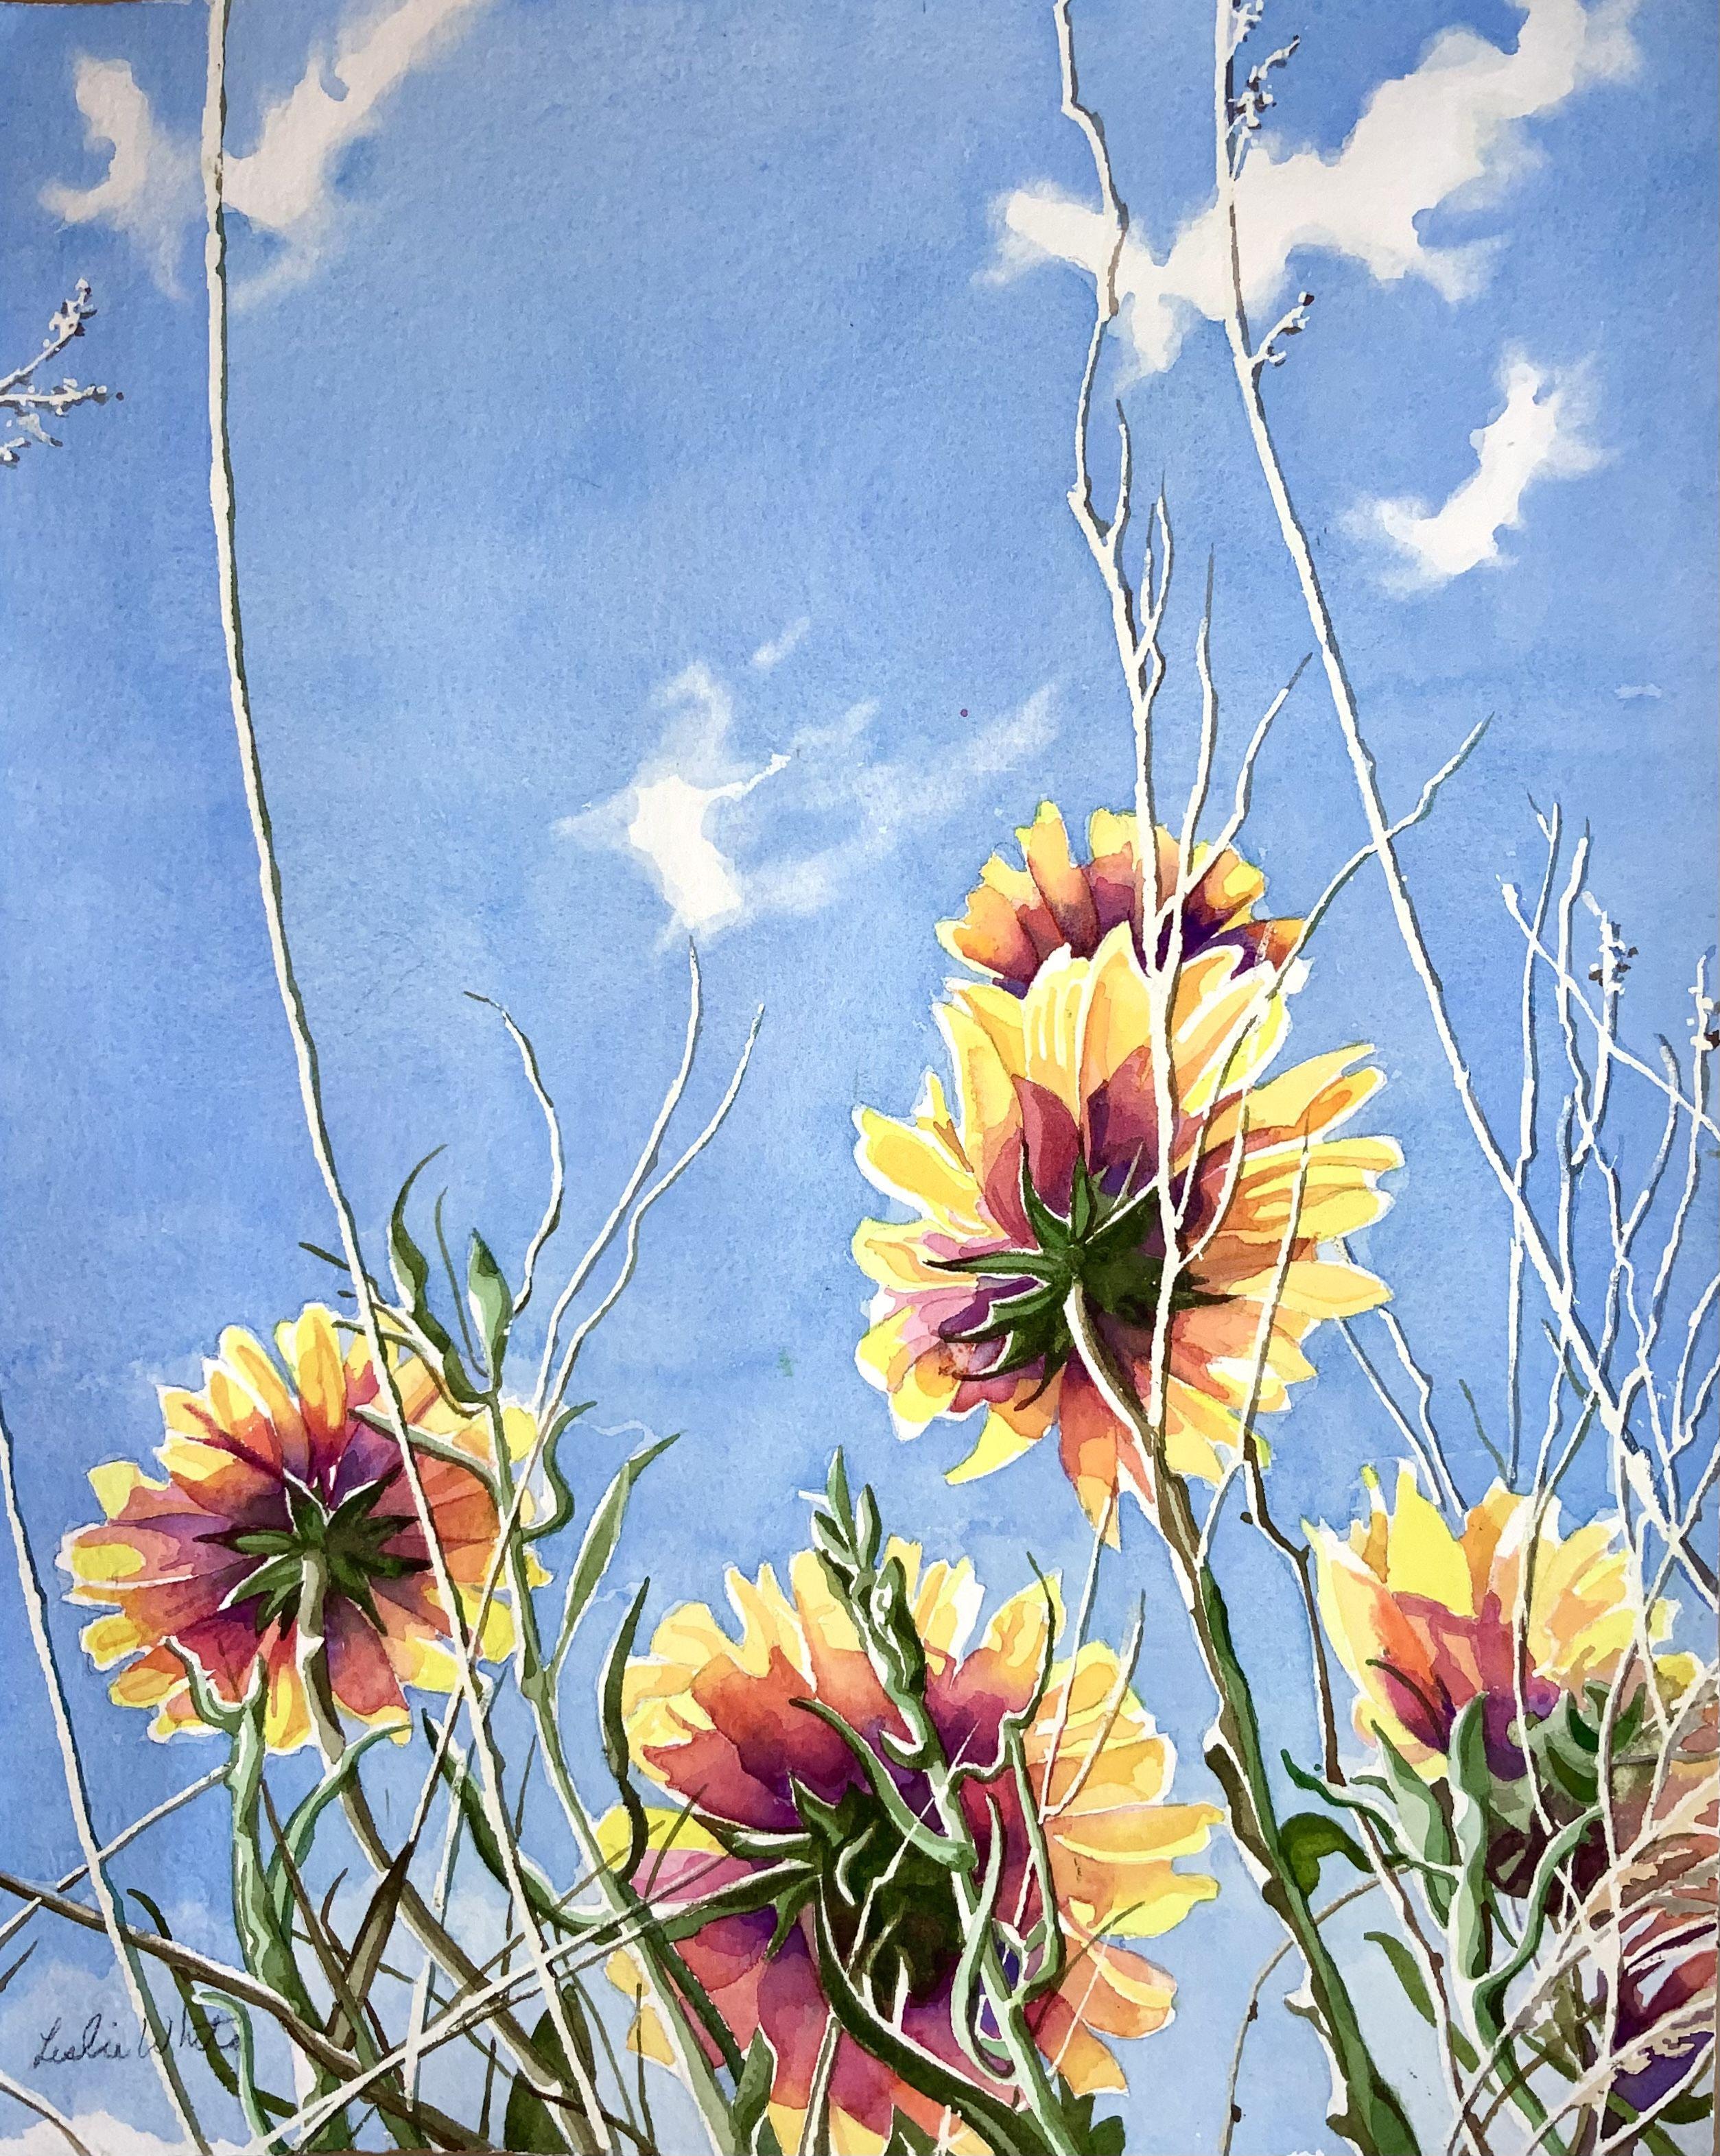 Wildflowers Reaching for the Clouds, Painting, Watercolor on Watercolor Paper - Art by Leslie White